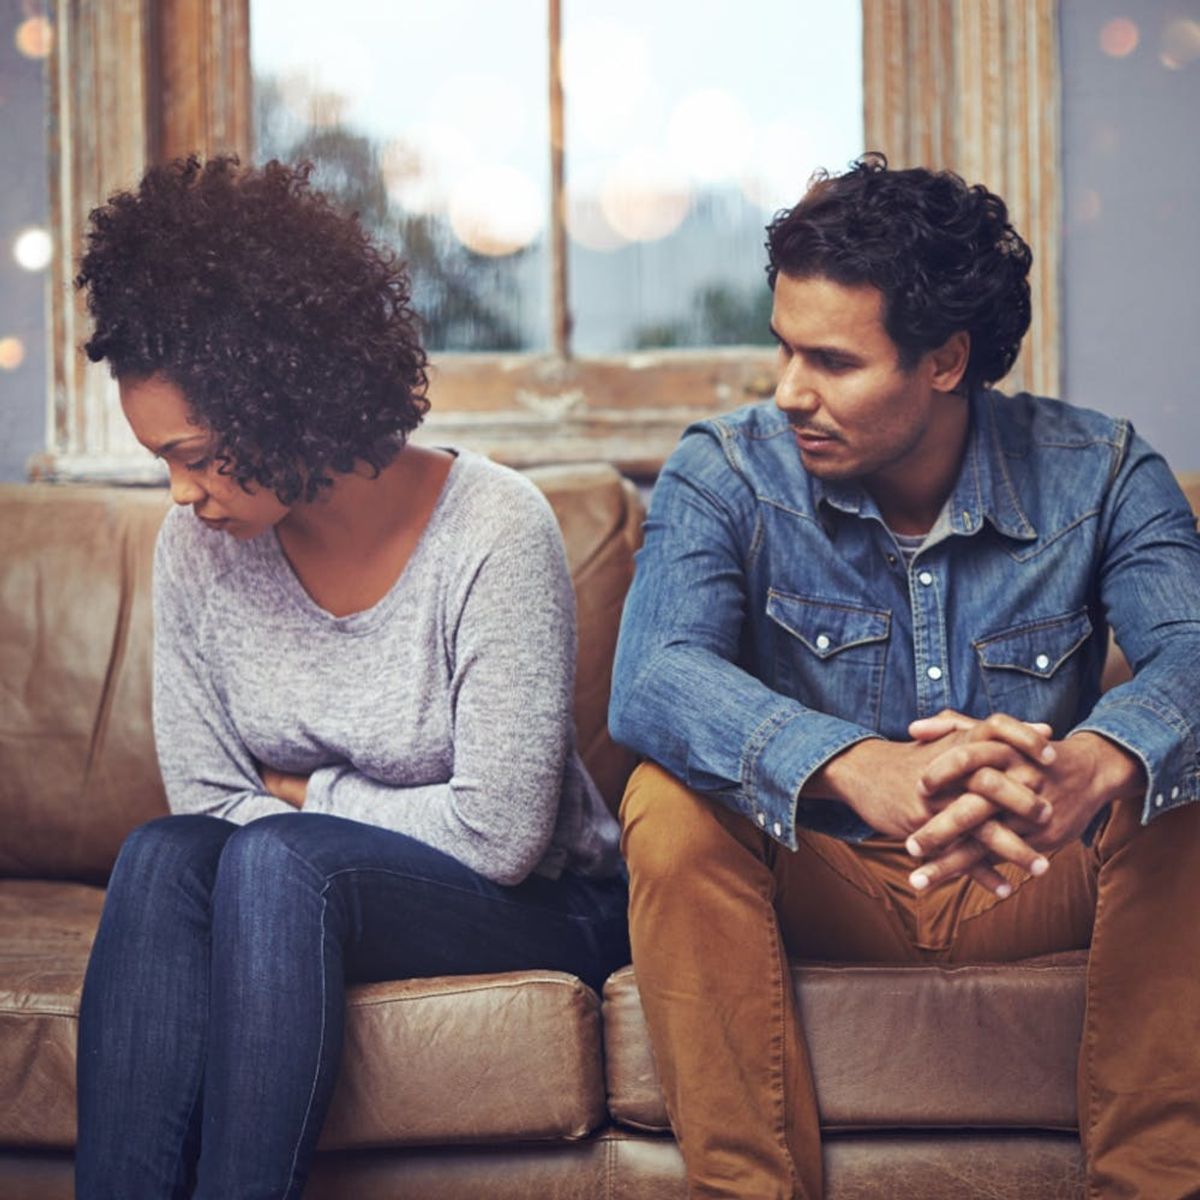 How You Resolve Conflicts in a Relationship Is Key to Its Success